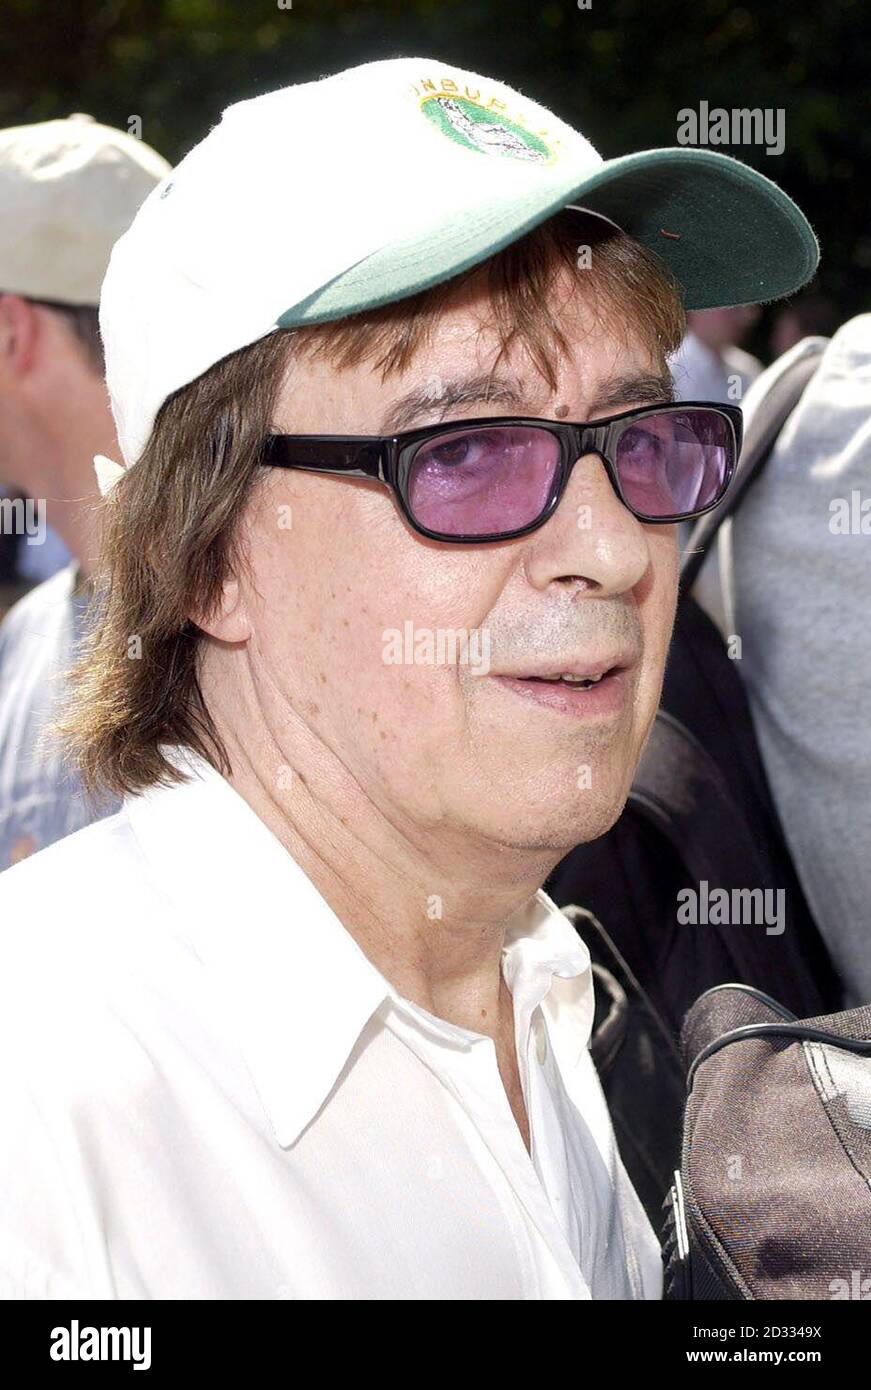 Former Rolling Stones guitarist Bill Wyman arrives to join Eric Clapton's celebrity team against Alec Stewart's Bunbury side in celebration of the England player's testimonial year at Ripley Court School in Surrey.  * Proceeds from the event will be divided between the Testimonial, NSPCC's Full Stop Campaign and the Cross Roads Clinic, Antigua.  Stock Photo